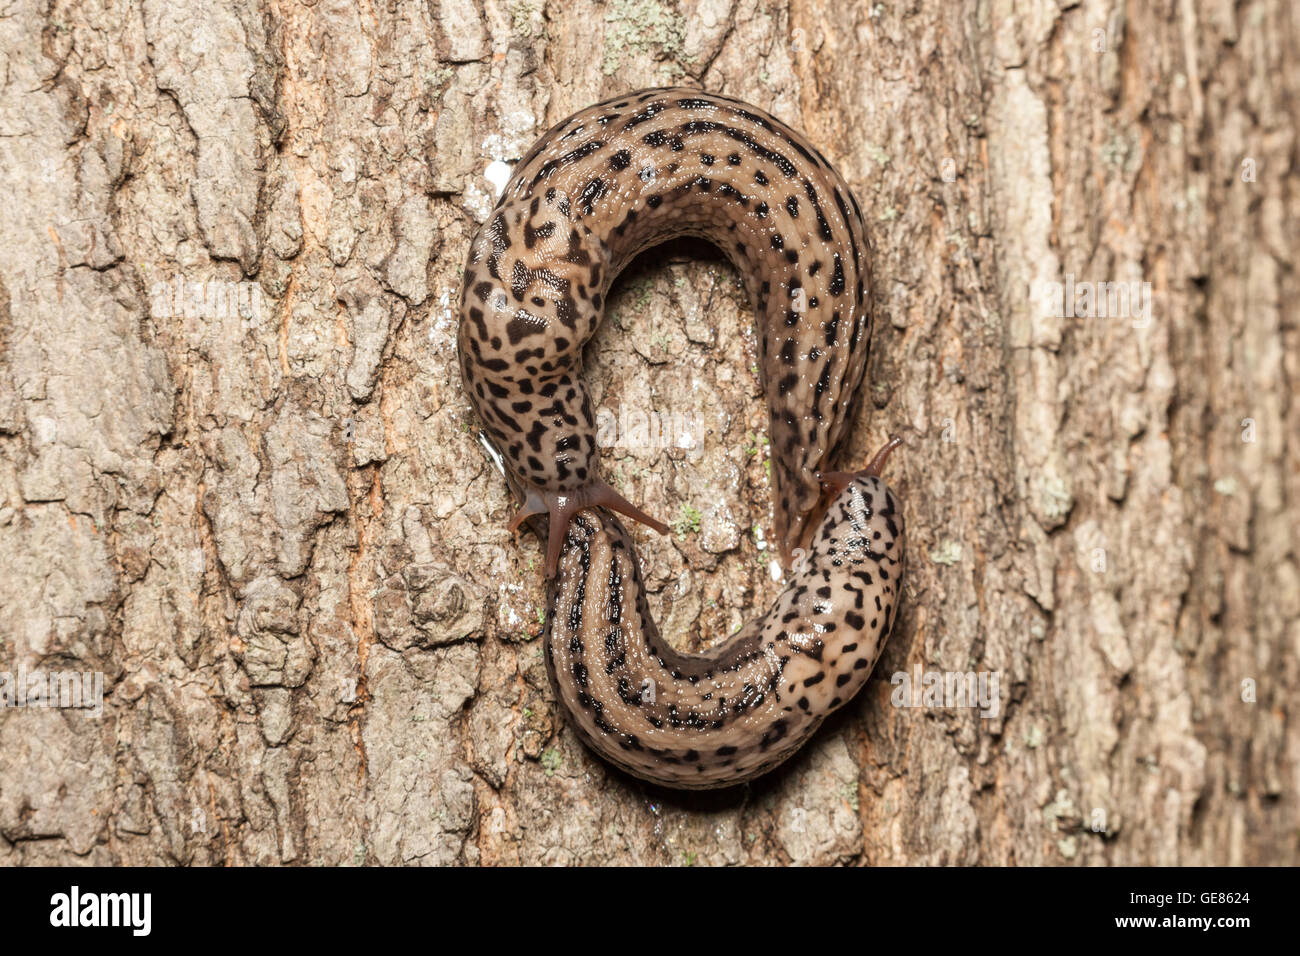 Two Leopard Slugs (Limax maximus) court by circling each other on the side of a tree prior to mating. Stock Photo